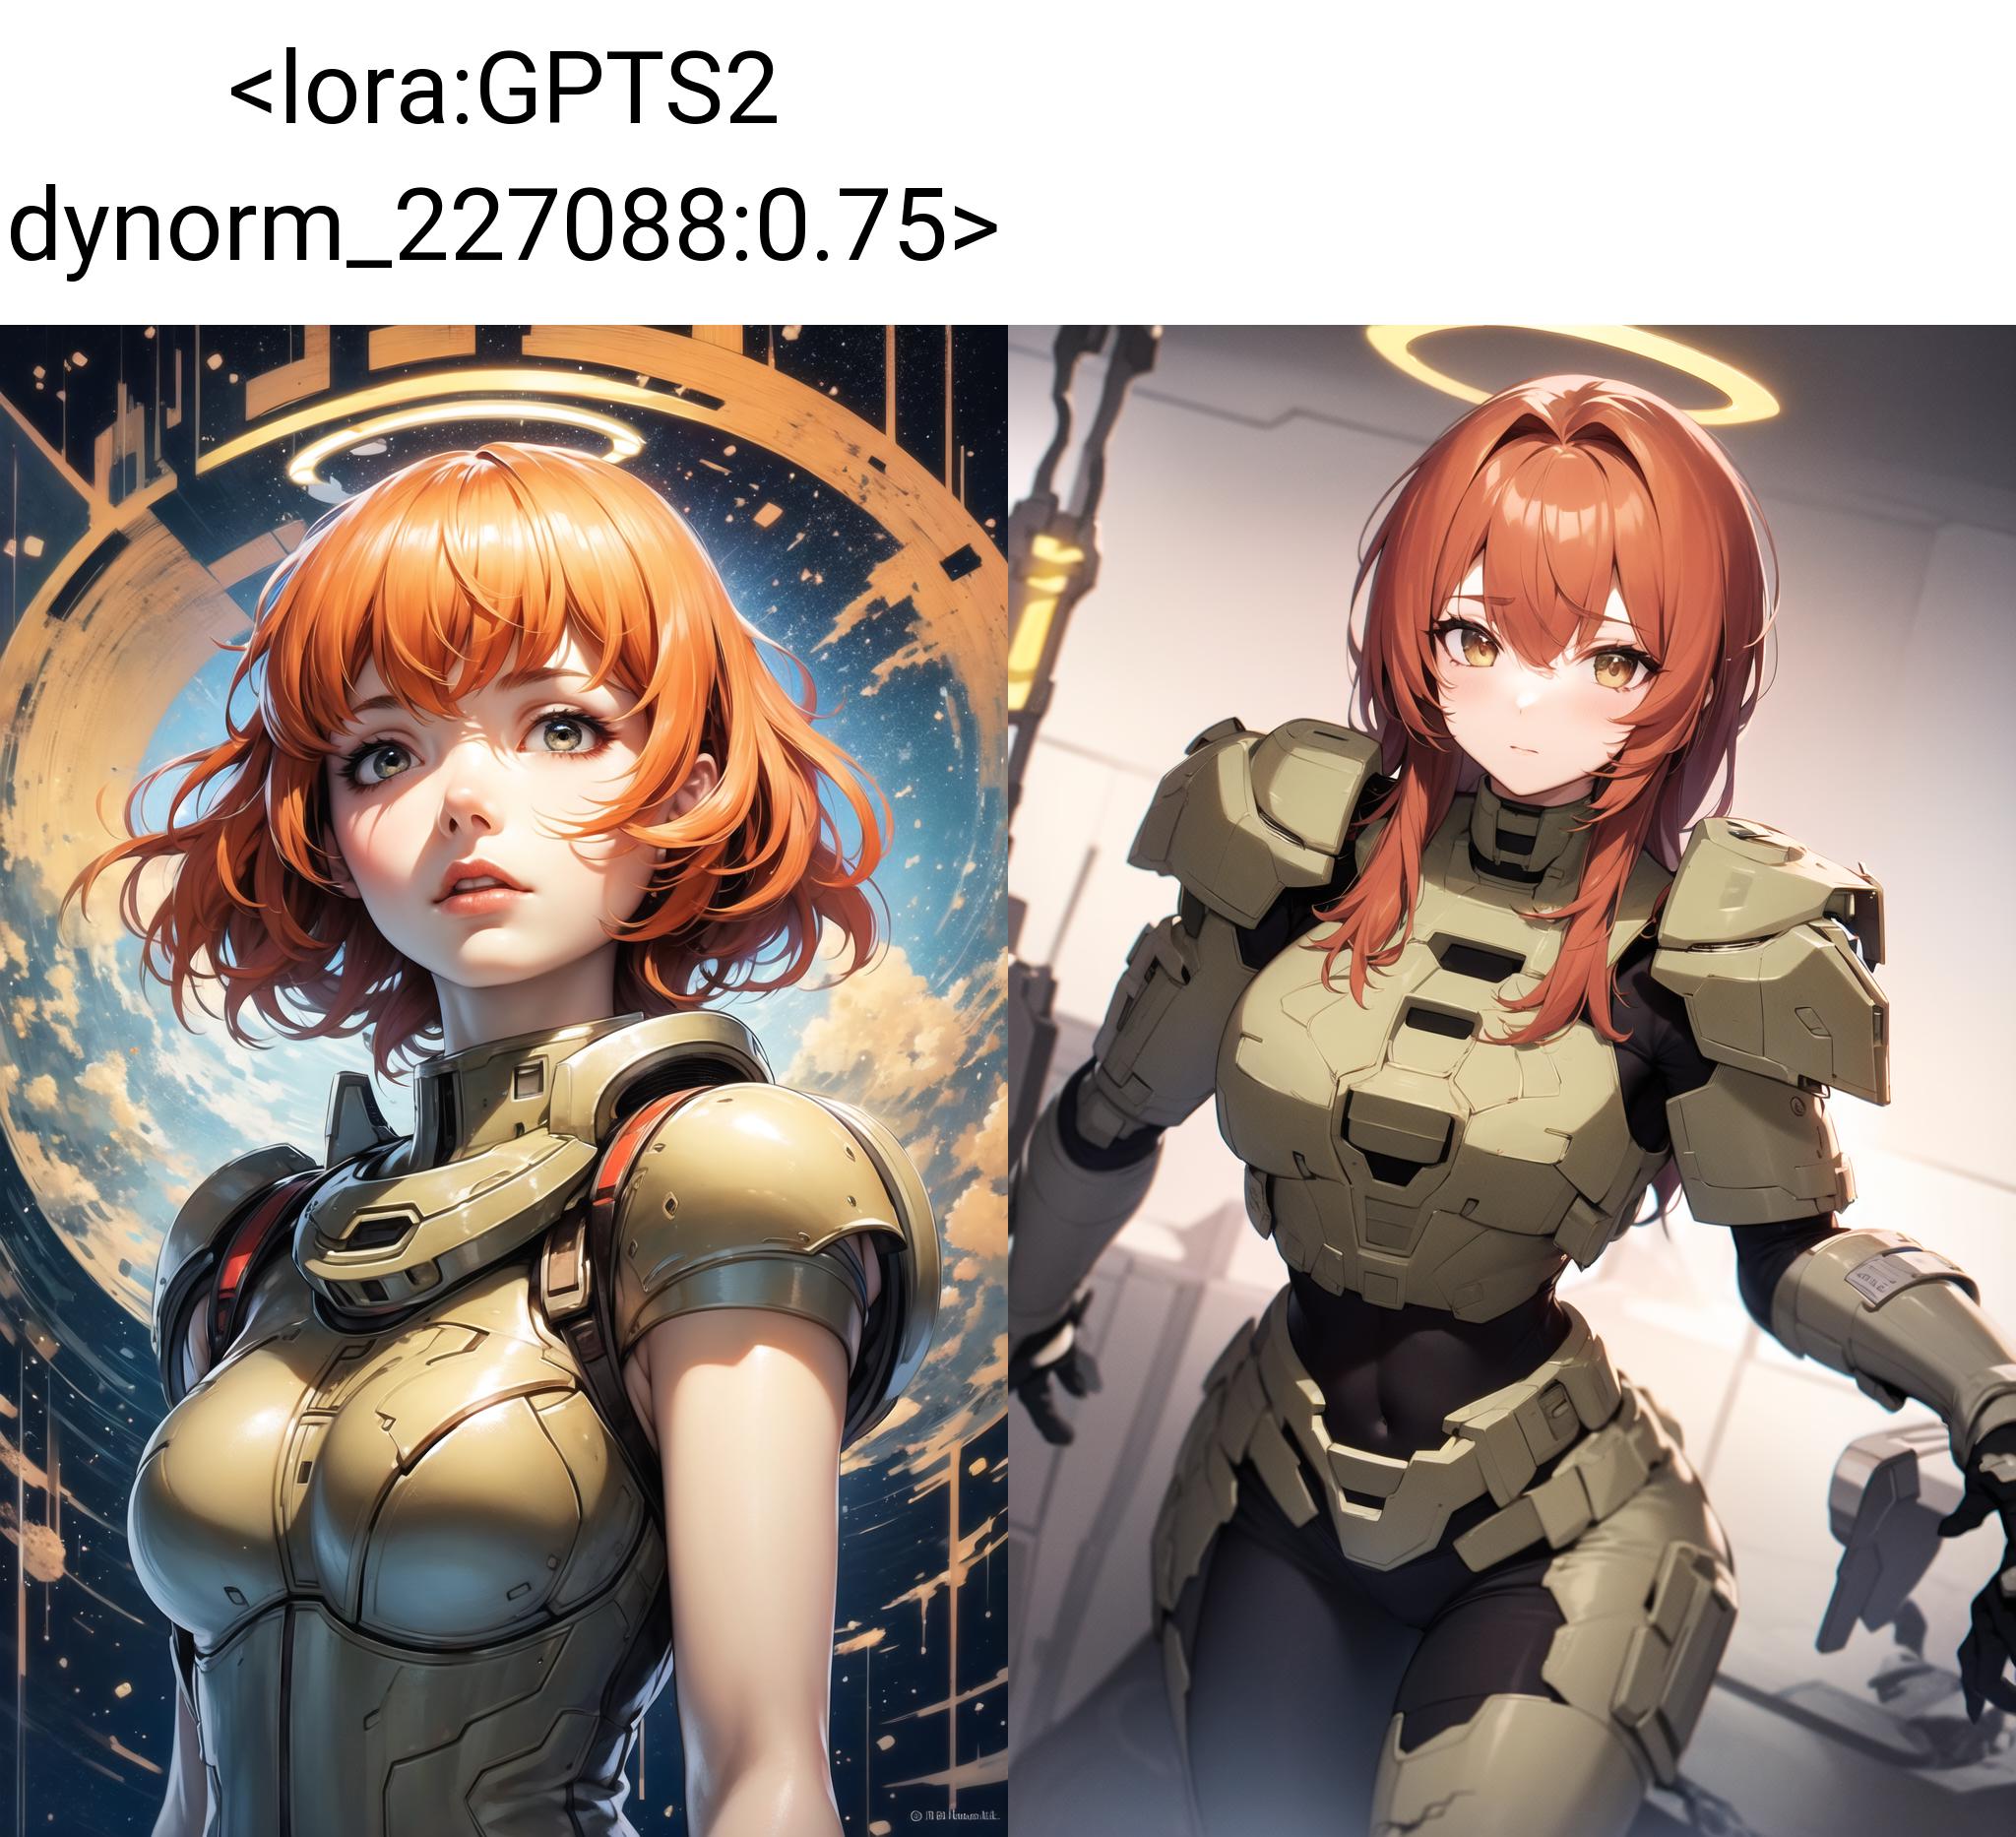 GPTS2 | Lazy Style LoRA | Extended LoRA image by Anzhc